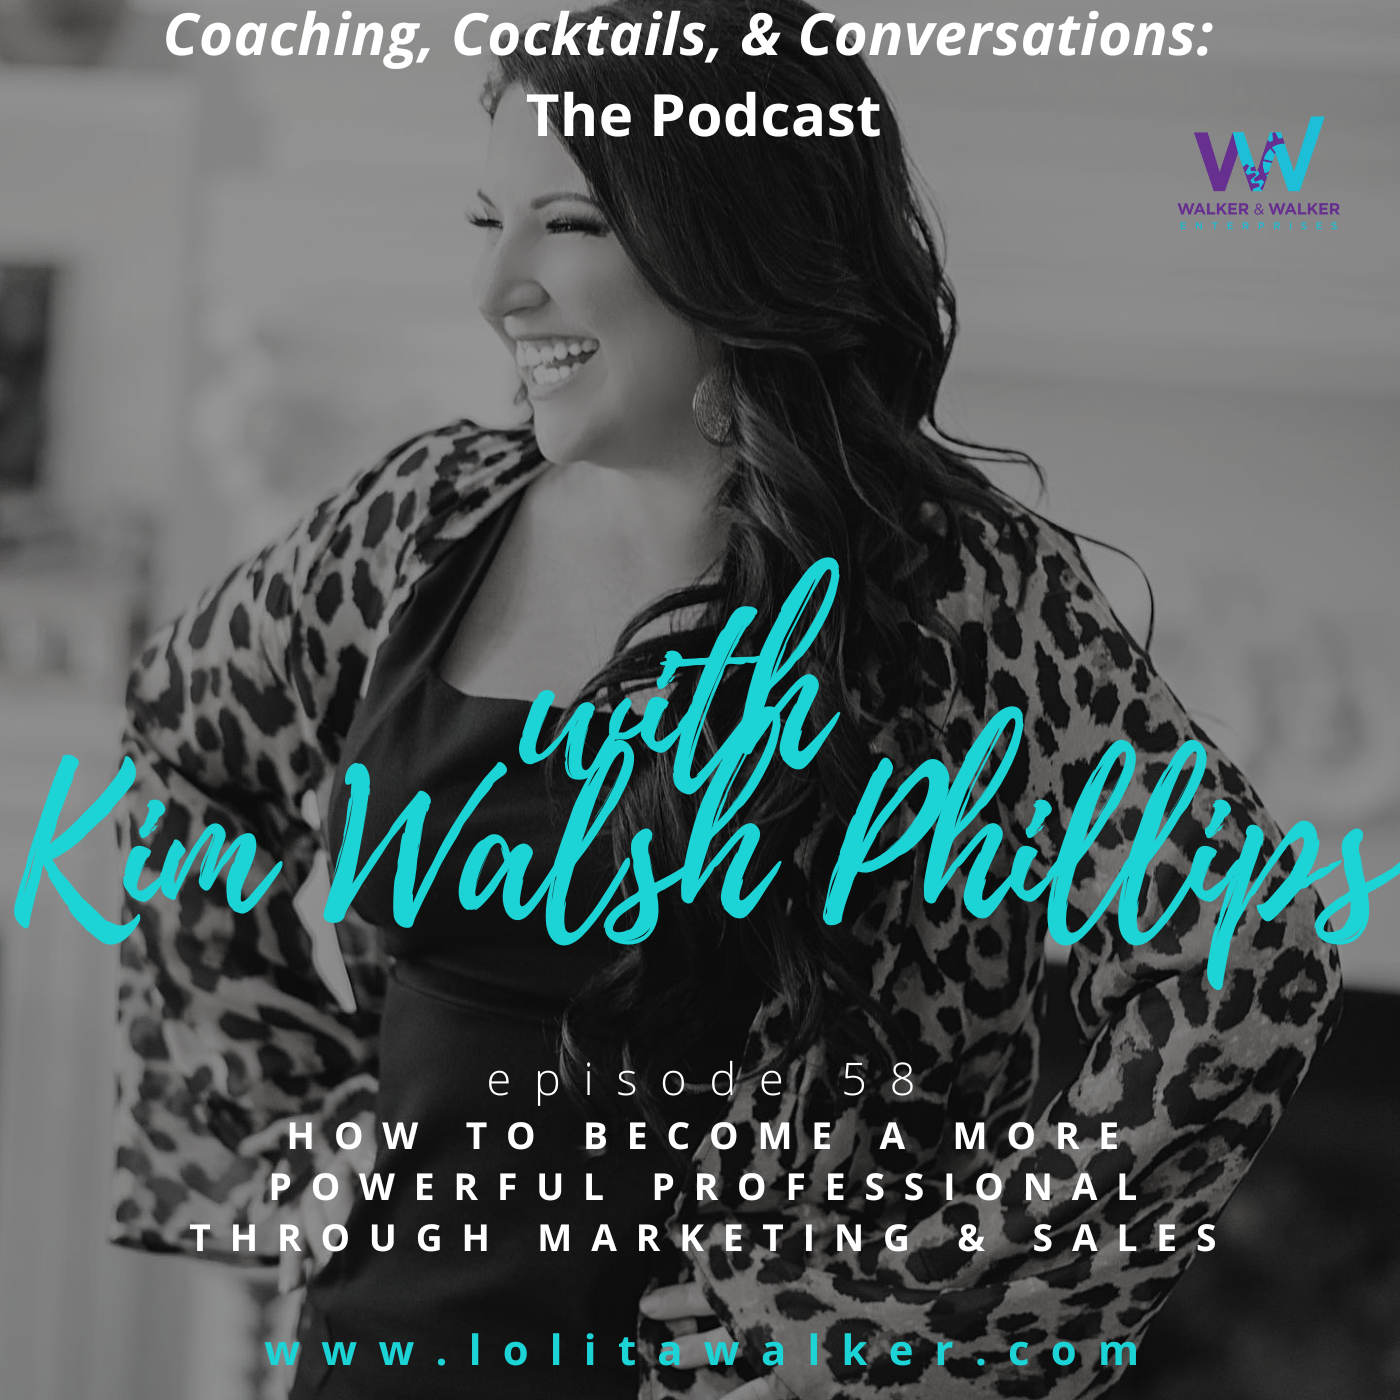 S3E58 - How to Become a More Powerful Professional Through Sales & Marketing (with Kim Walsh Phillips) Image